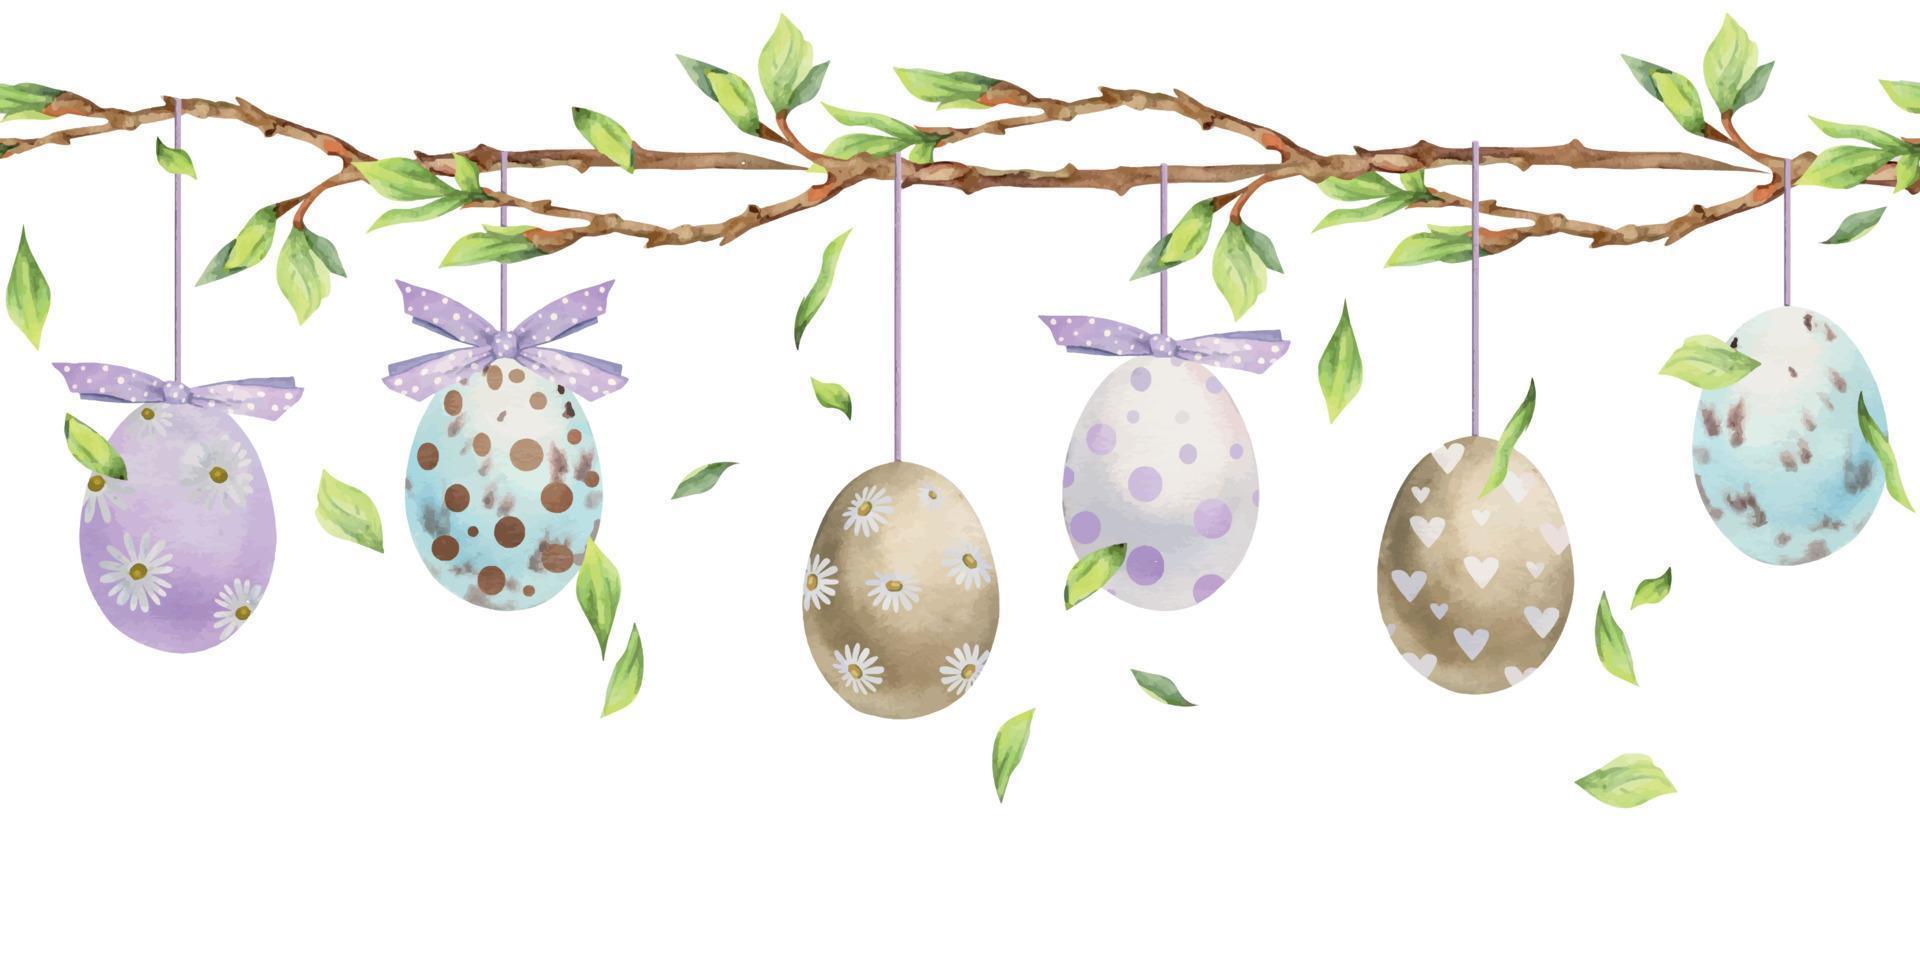 Watercolor hand drawn Easter celebration clipart. Seamless border with garland hanging eggs, bows, spring leaves. Isolated on white background. Invitations, gifts, greeting cards, print, textile vector